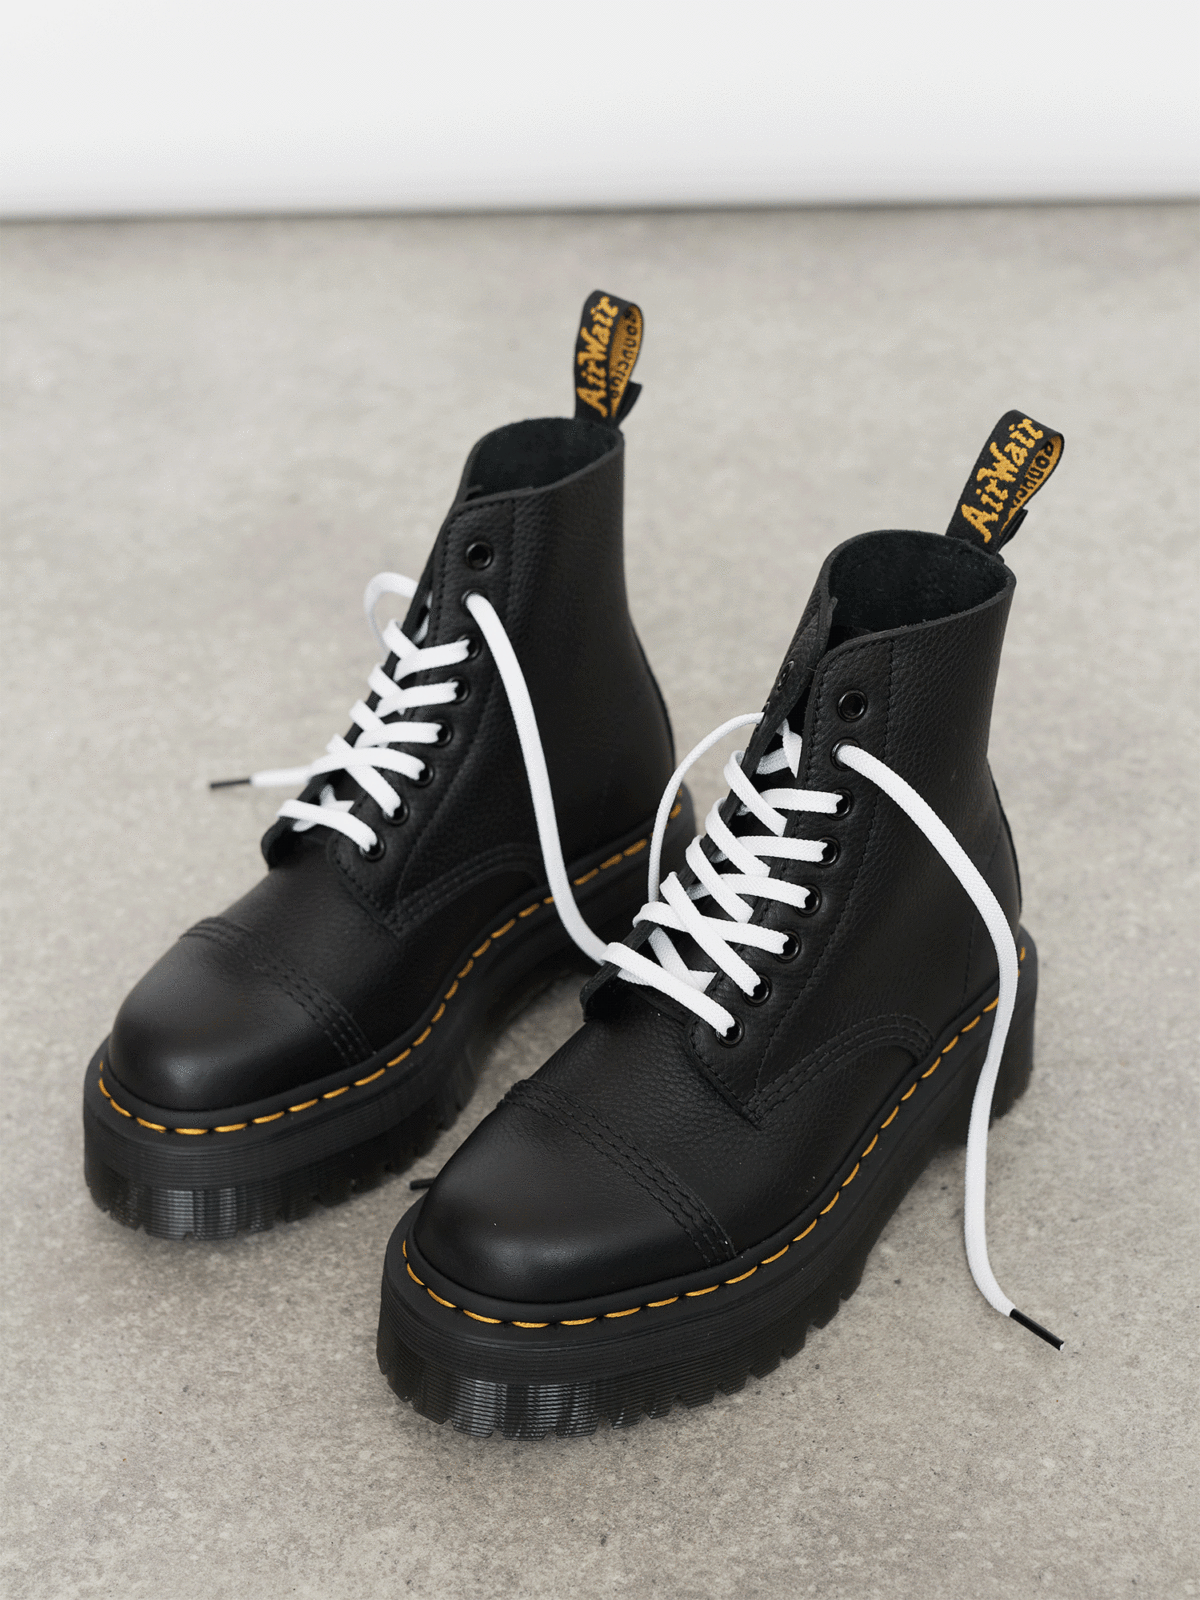 Only 39.60 usd for Dr. Martens x LO Sinclair Happy Sad Platform Boots  Online at the Shop